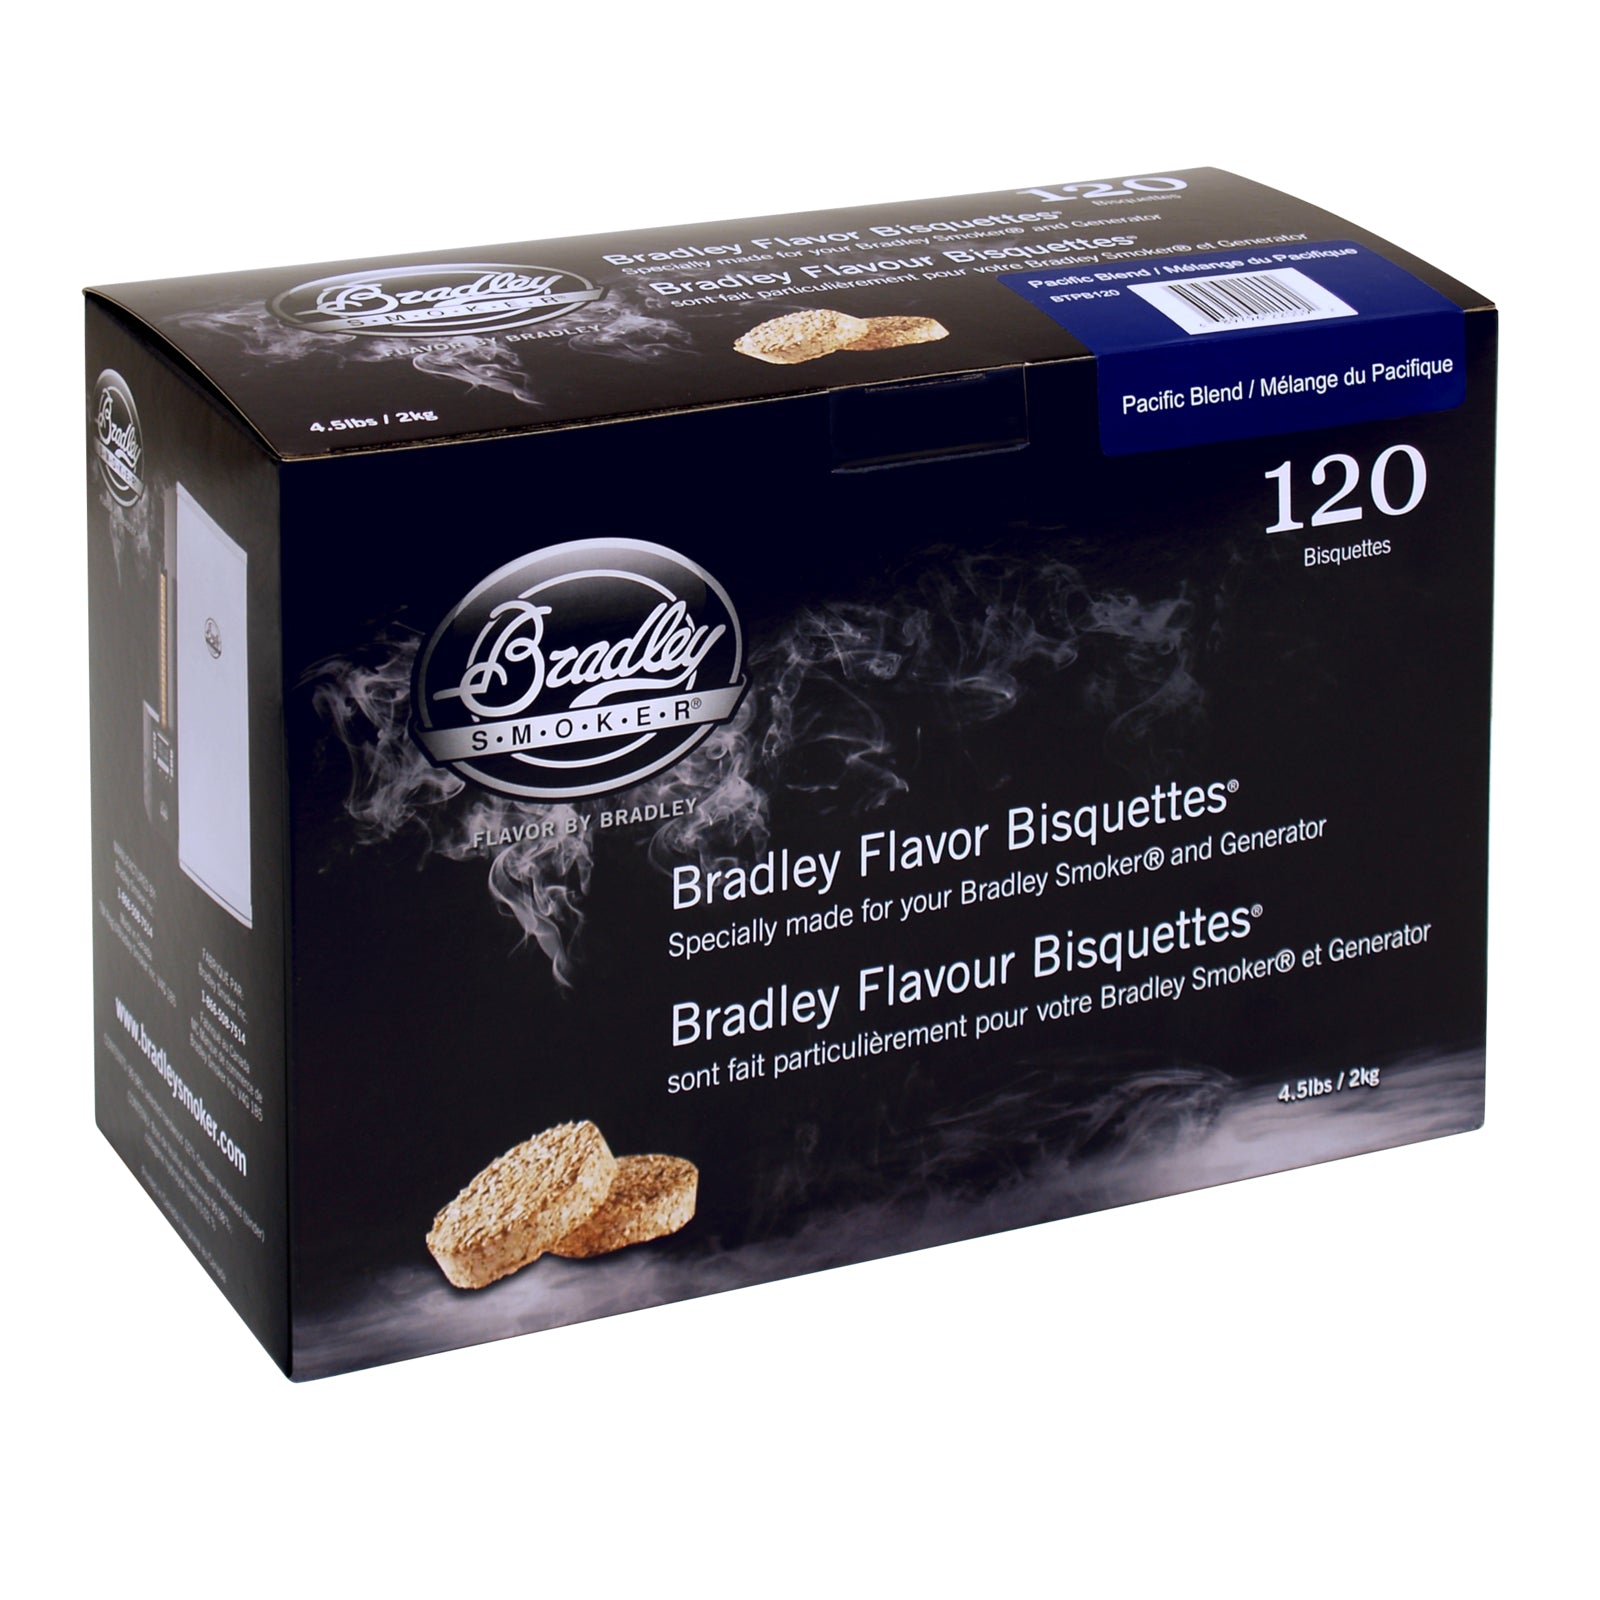 Pacific Blend Bisquettes (120 Pack)